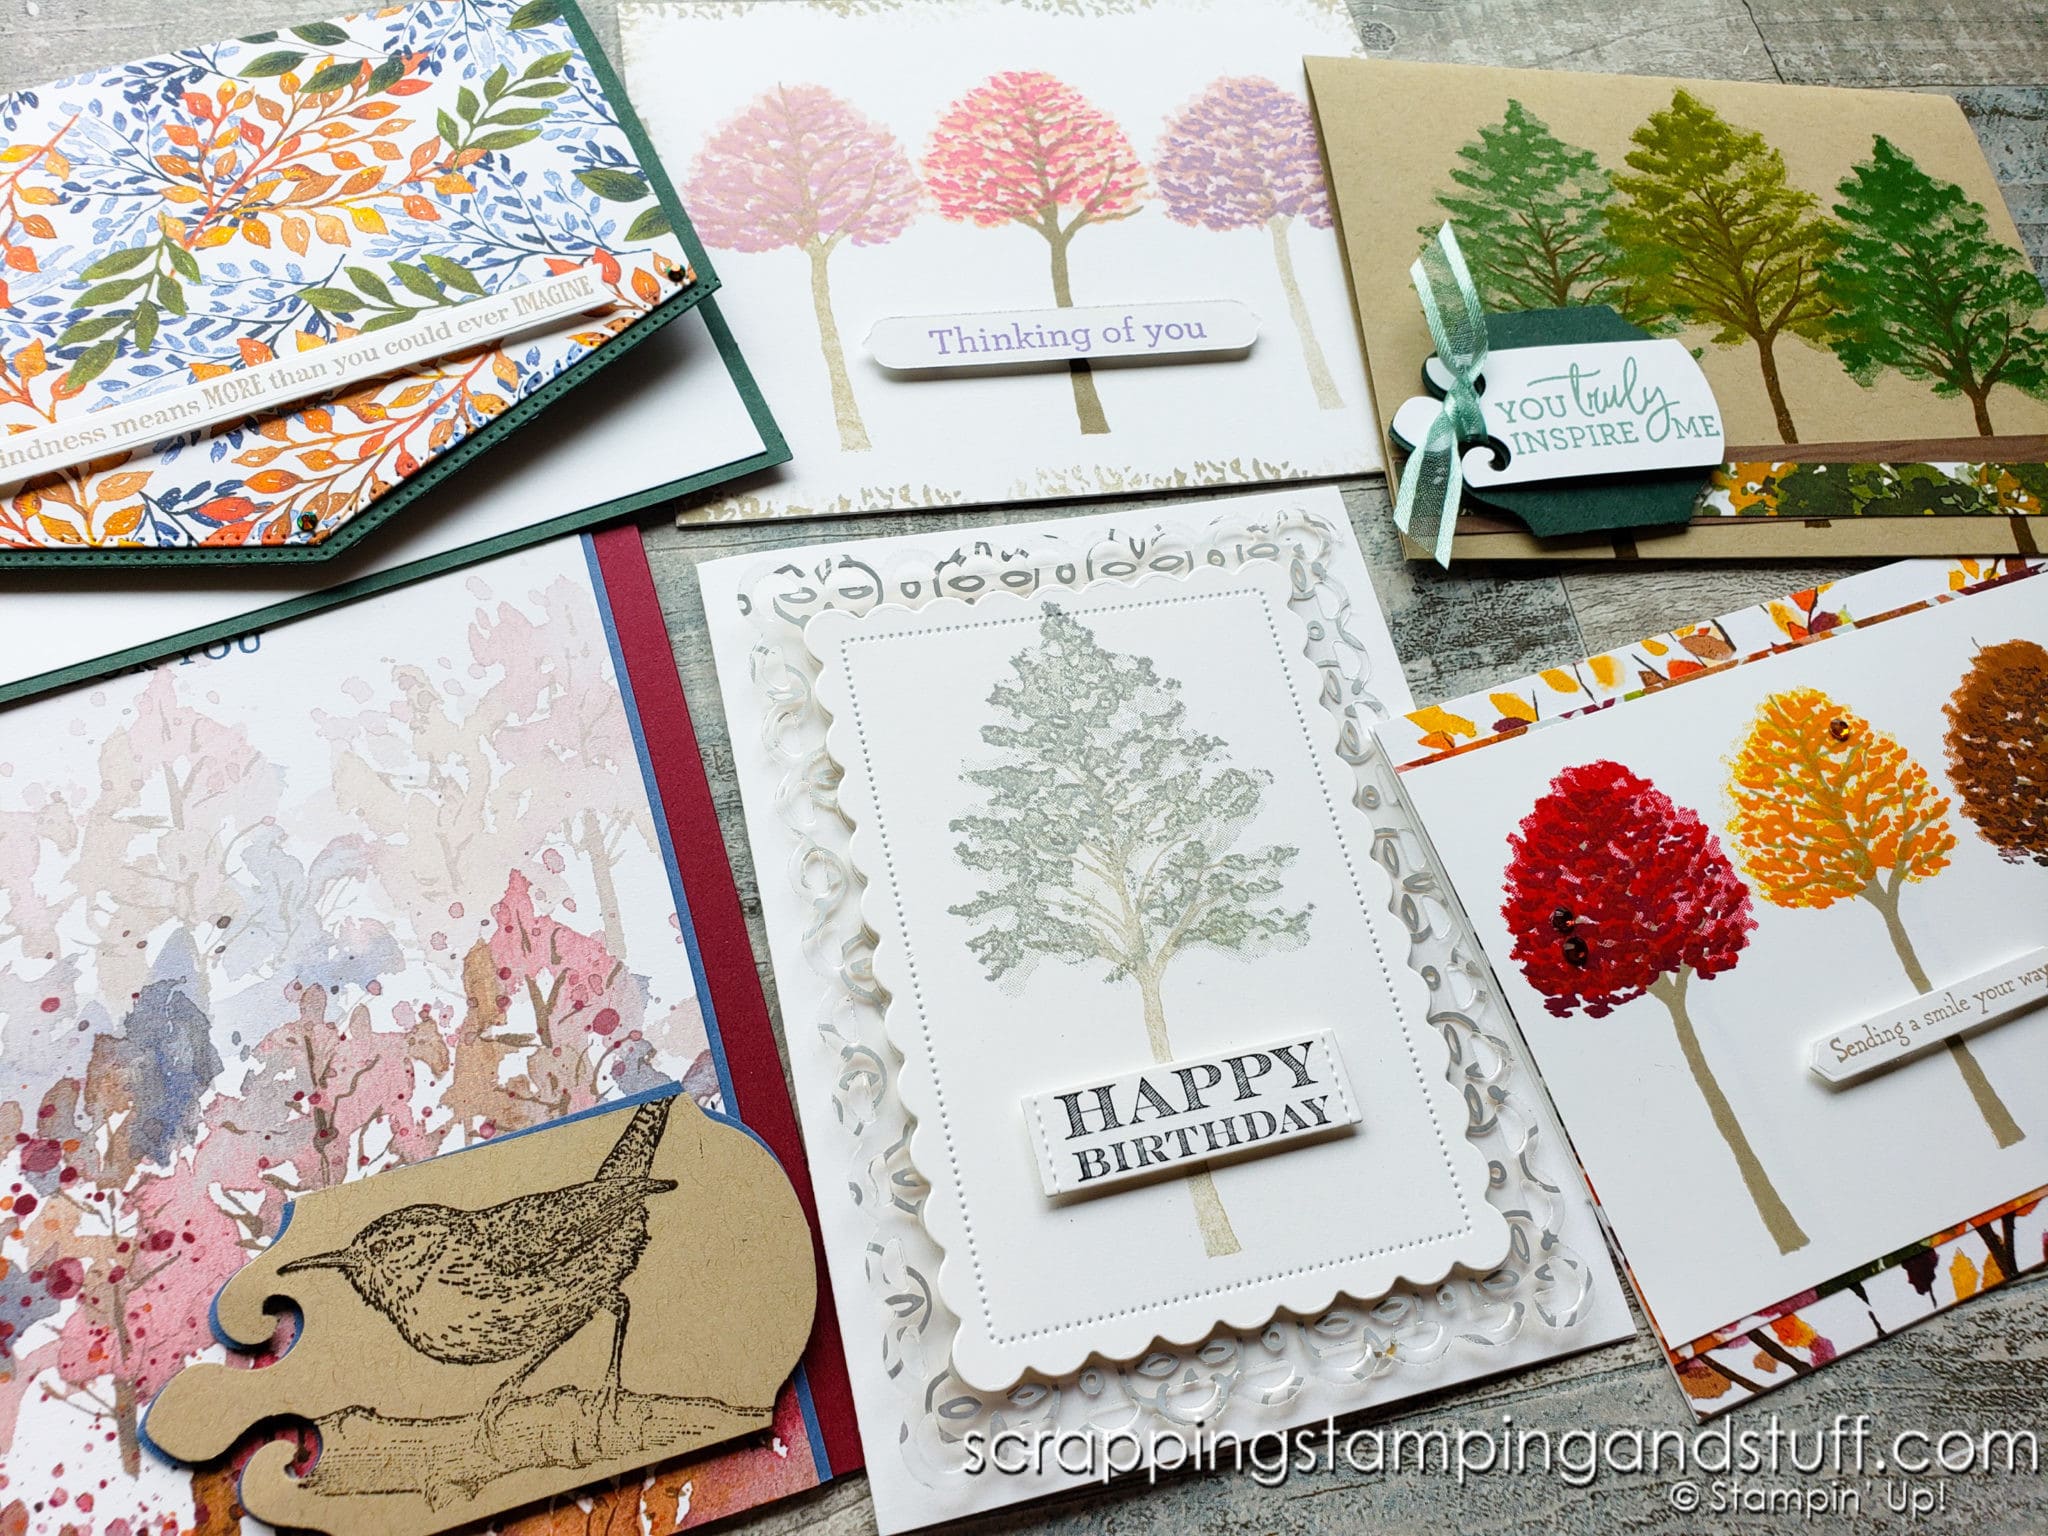 Stampin Up Beauty of Friendship Makes Gorgeous Tree Cards